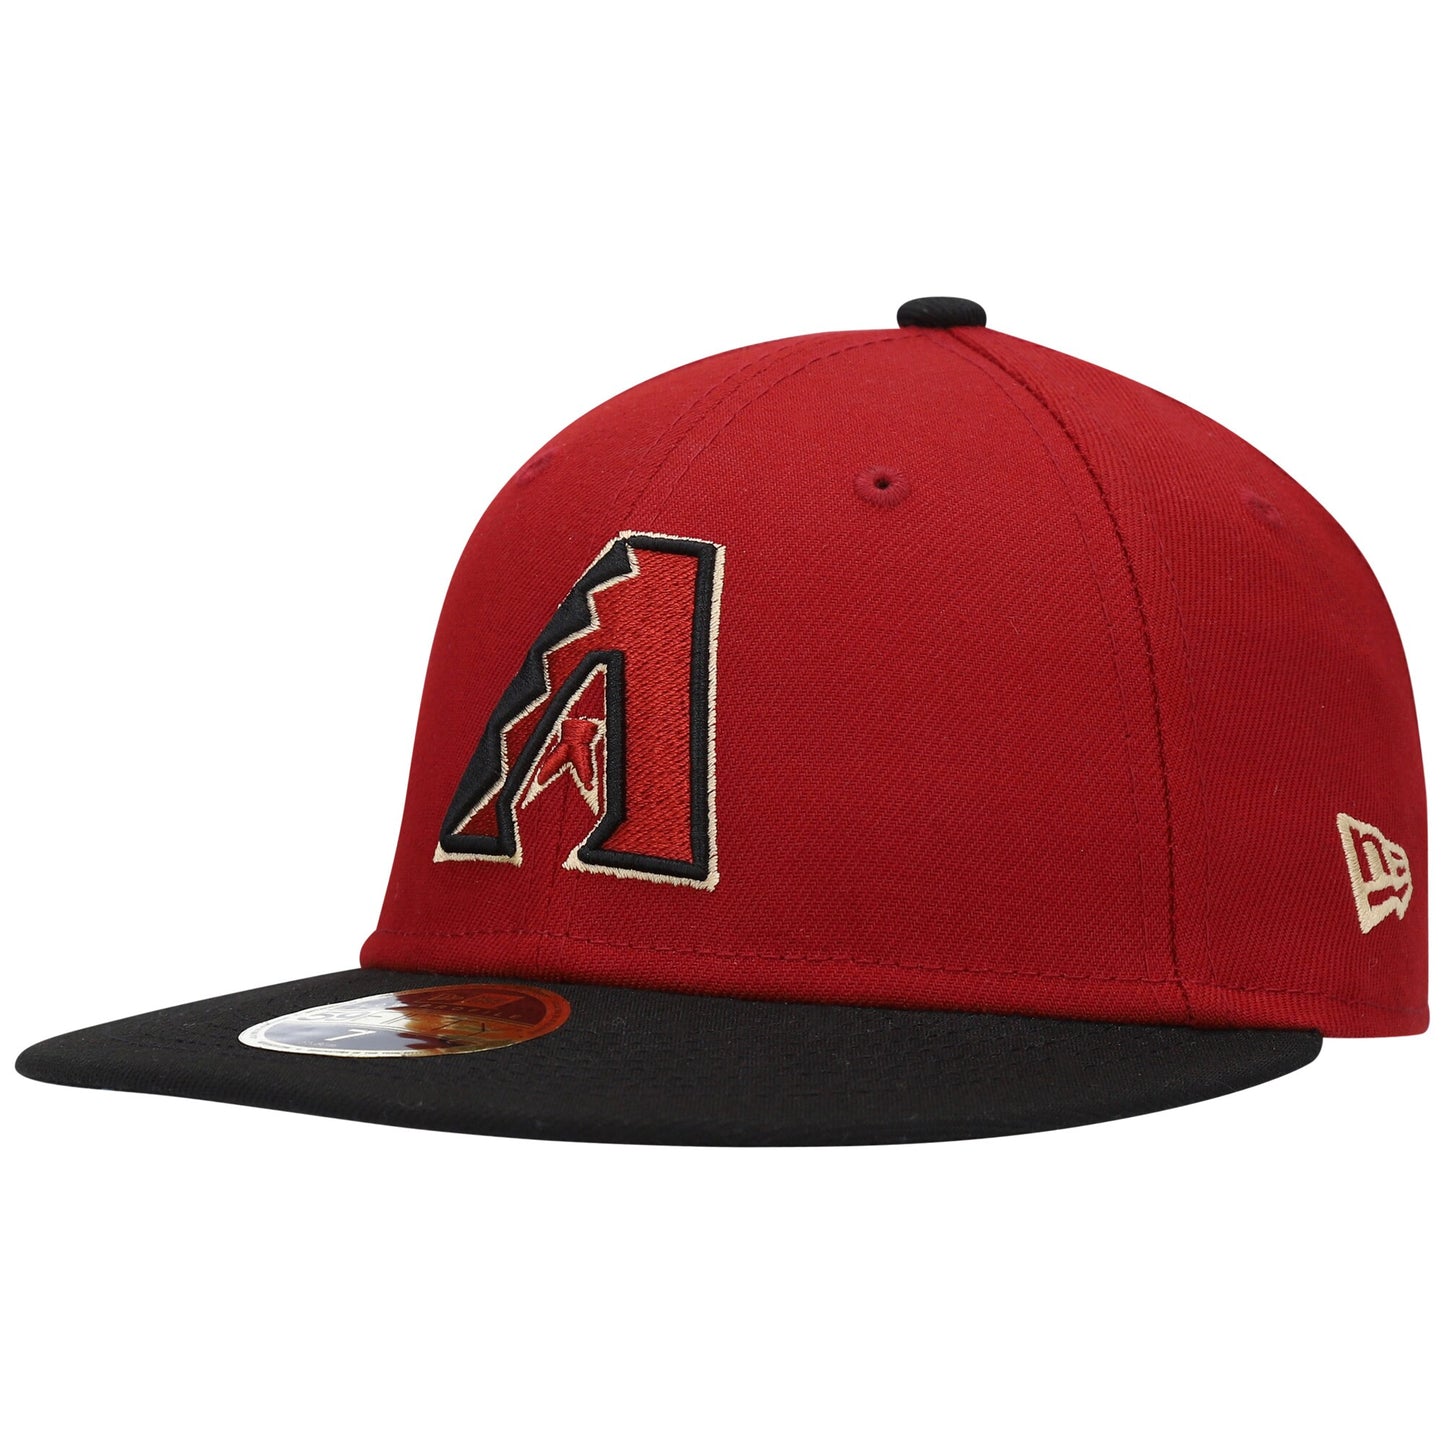 Arizona Diamondbacks New Era Authentic Collection On-Field Alternate Low Profile 59FIFTY Fitted Hat - Red